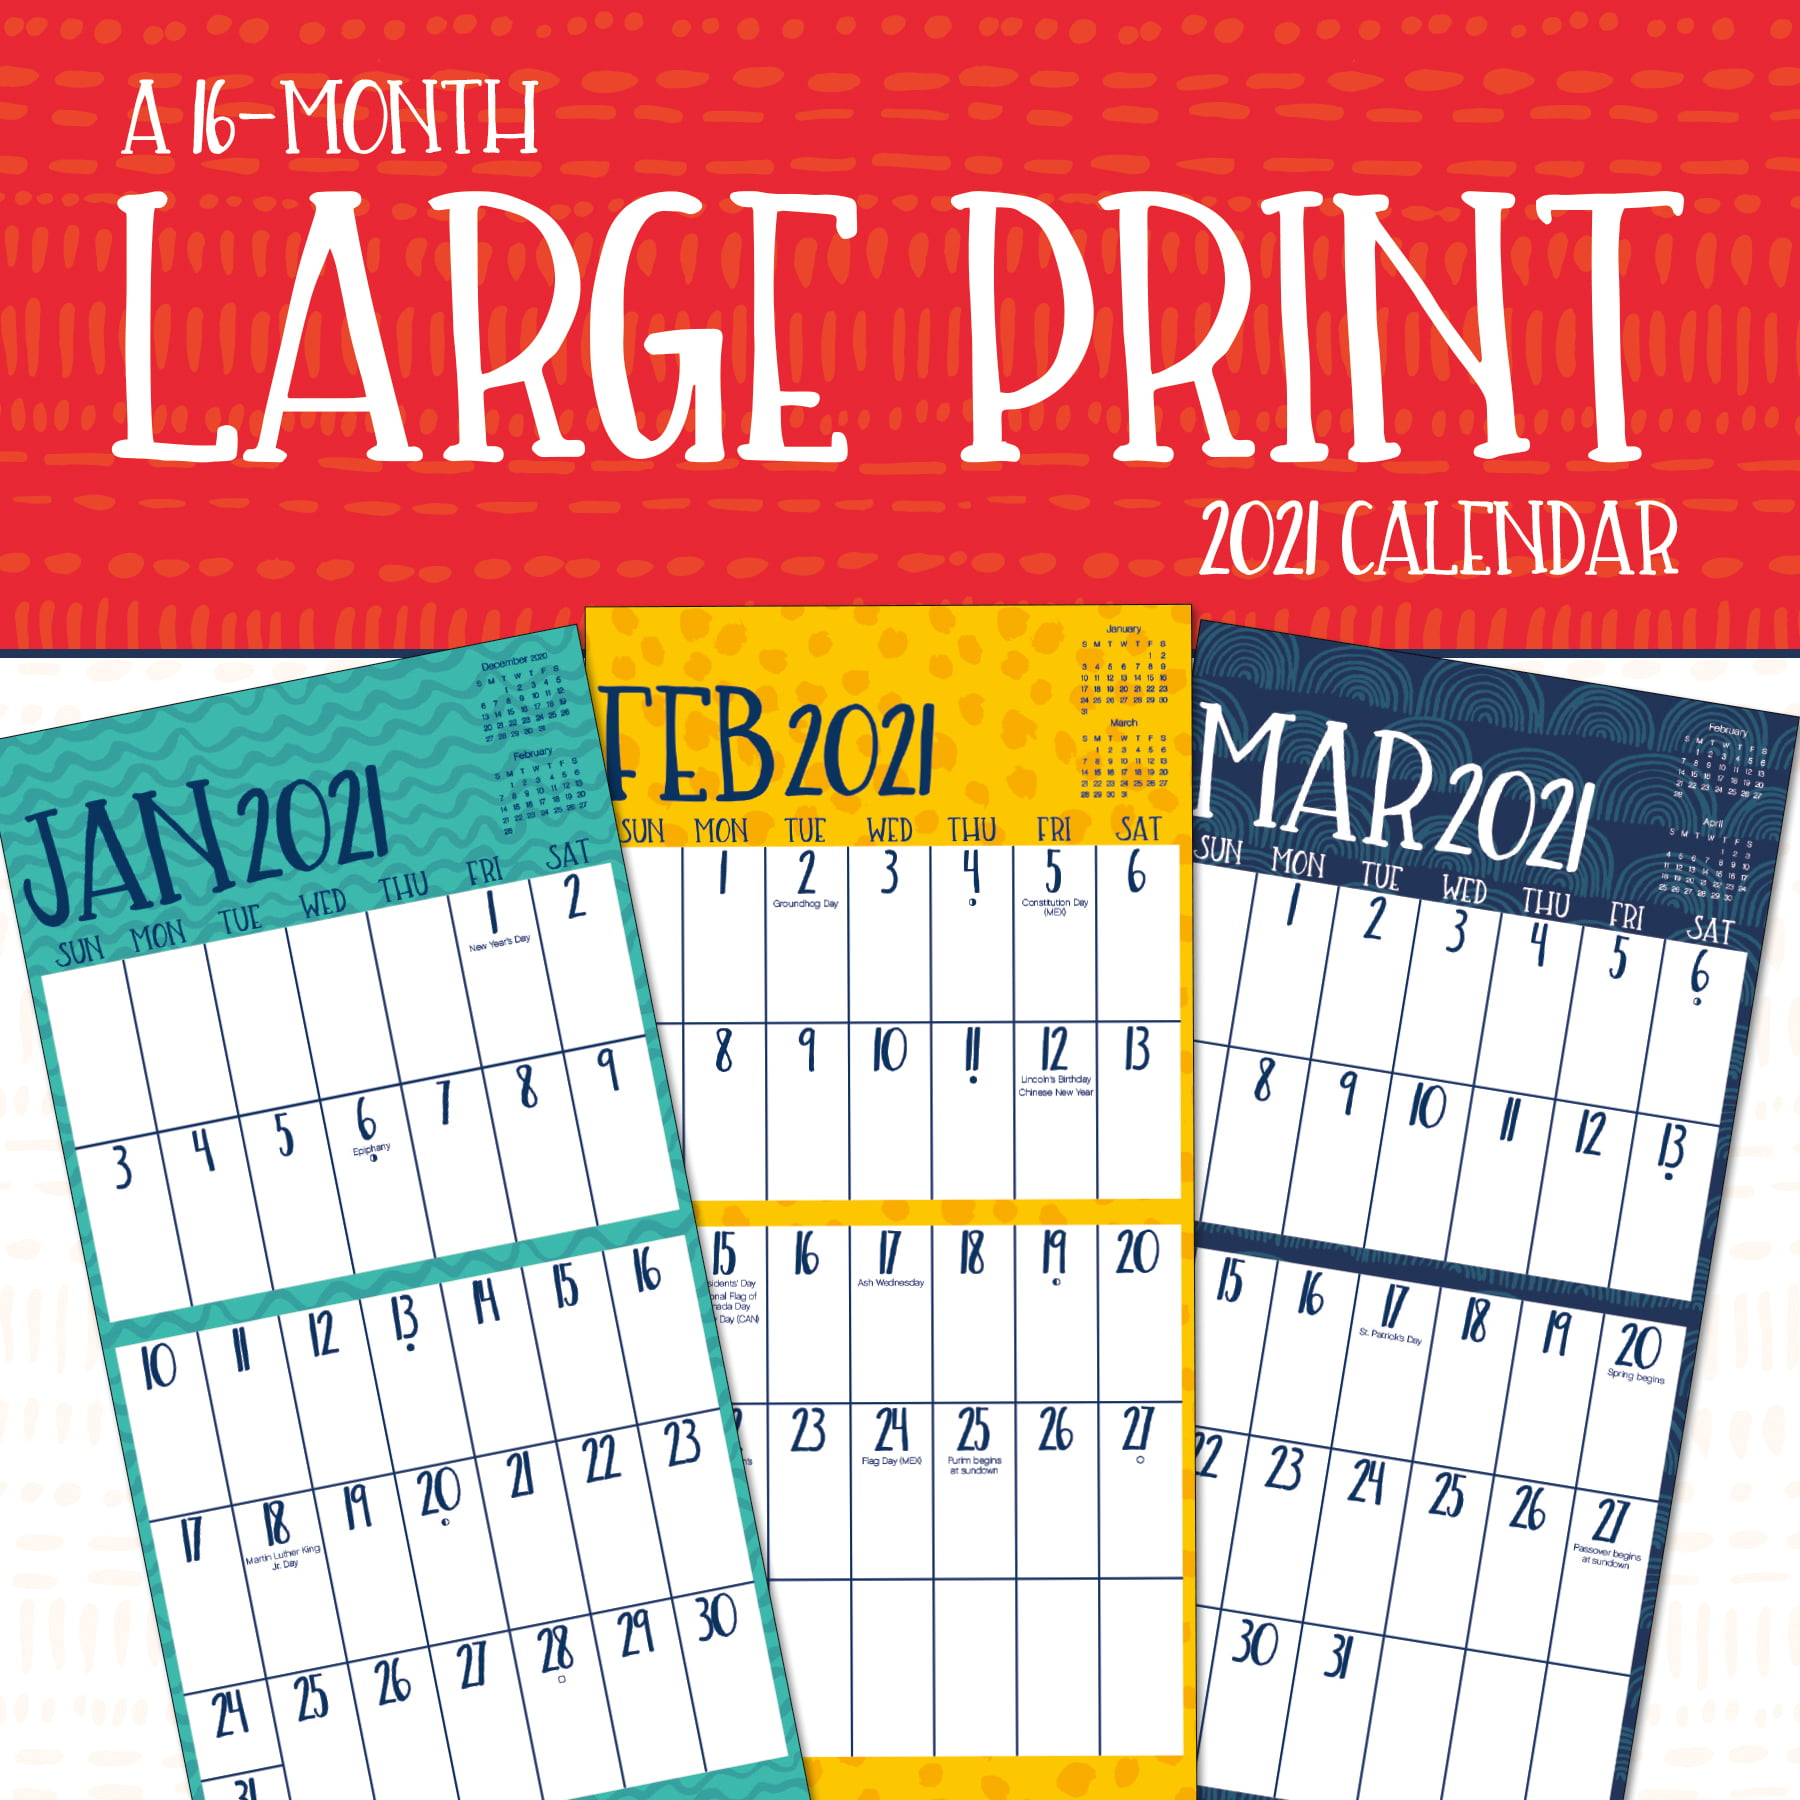 2025-yearly-large-calendar-for-wall-free-printable-templates